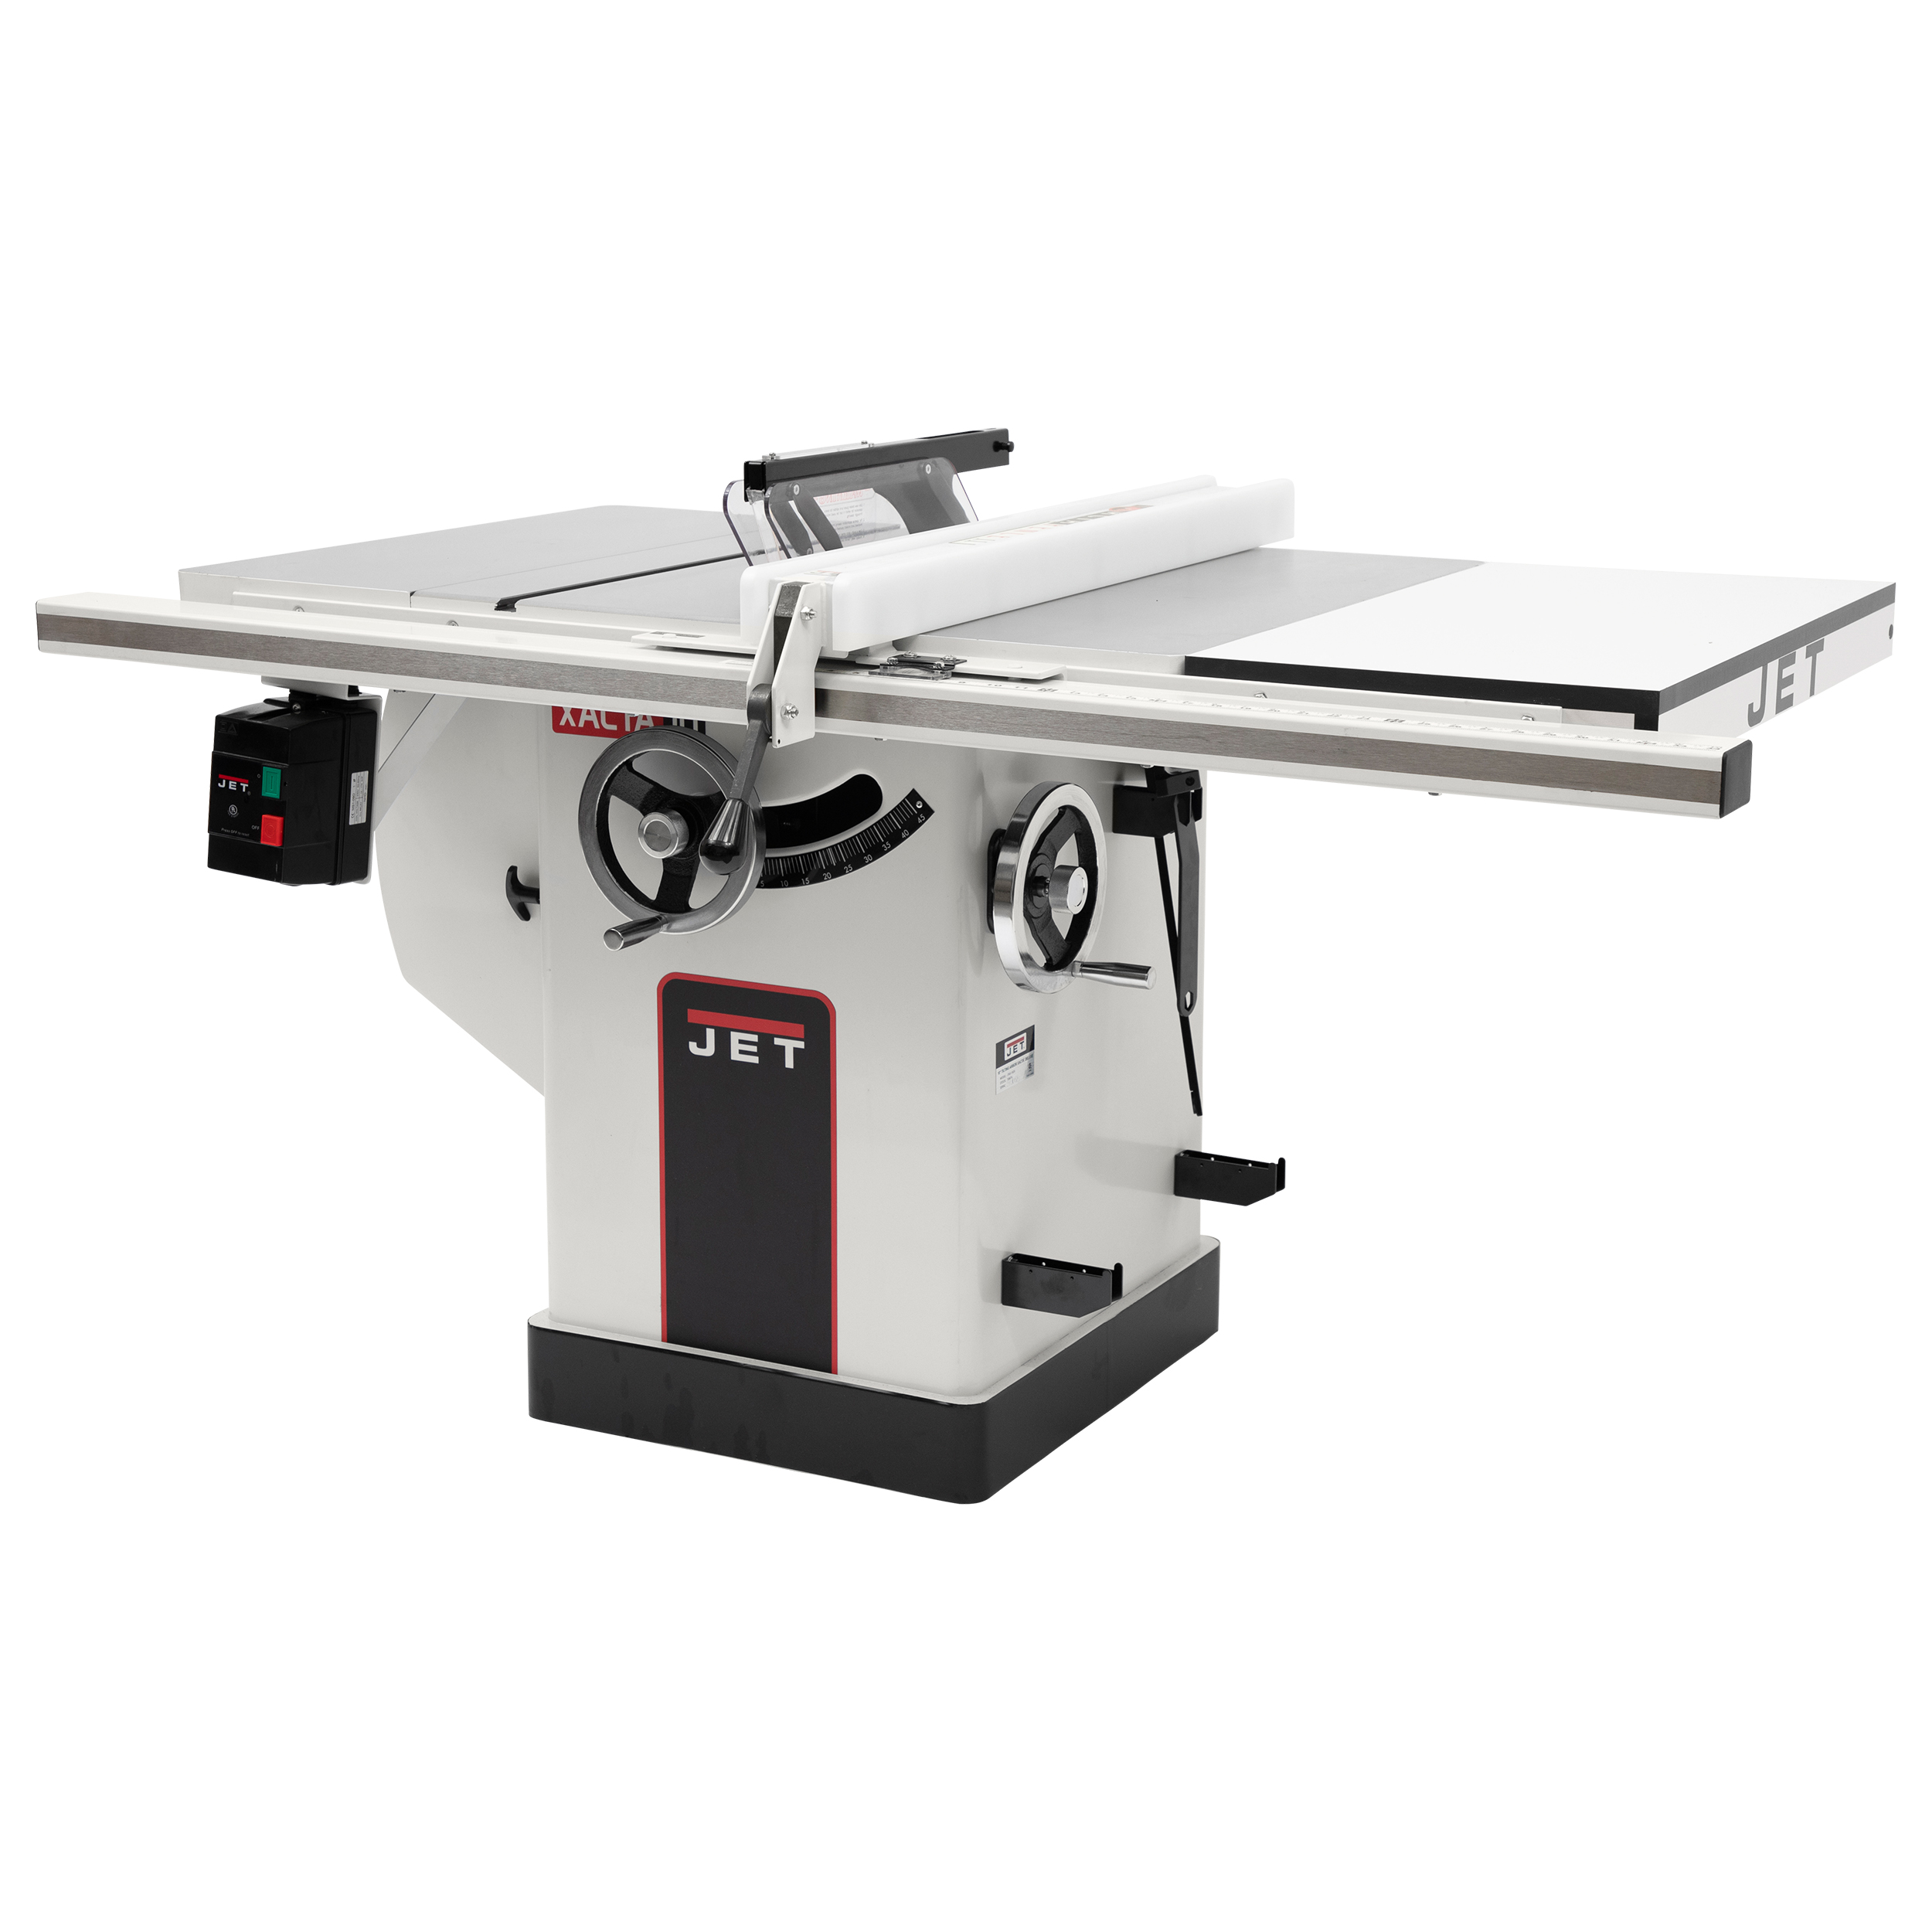 Xactasaw Deluxe Table Saw 5hp, 1ph, 30" Rip